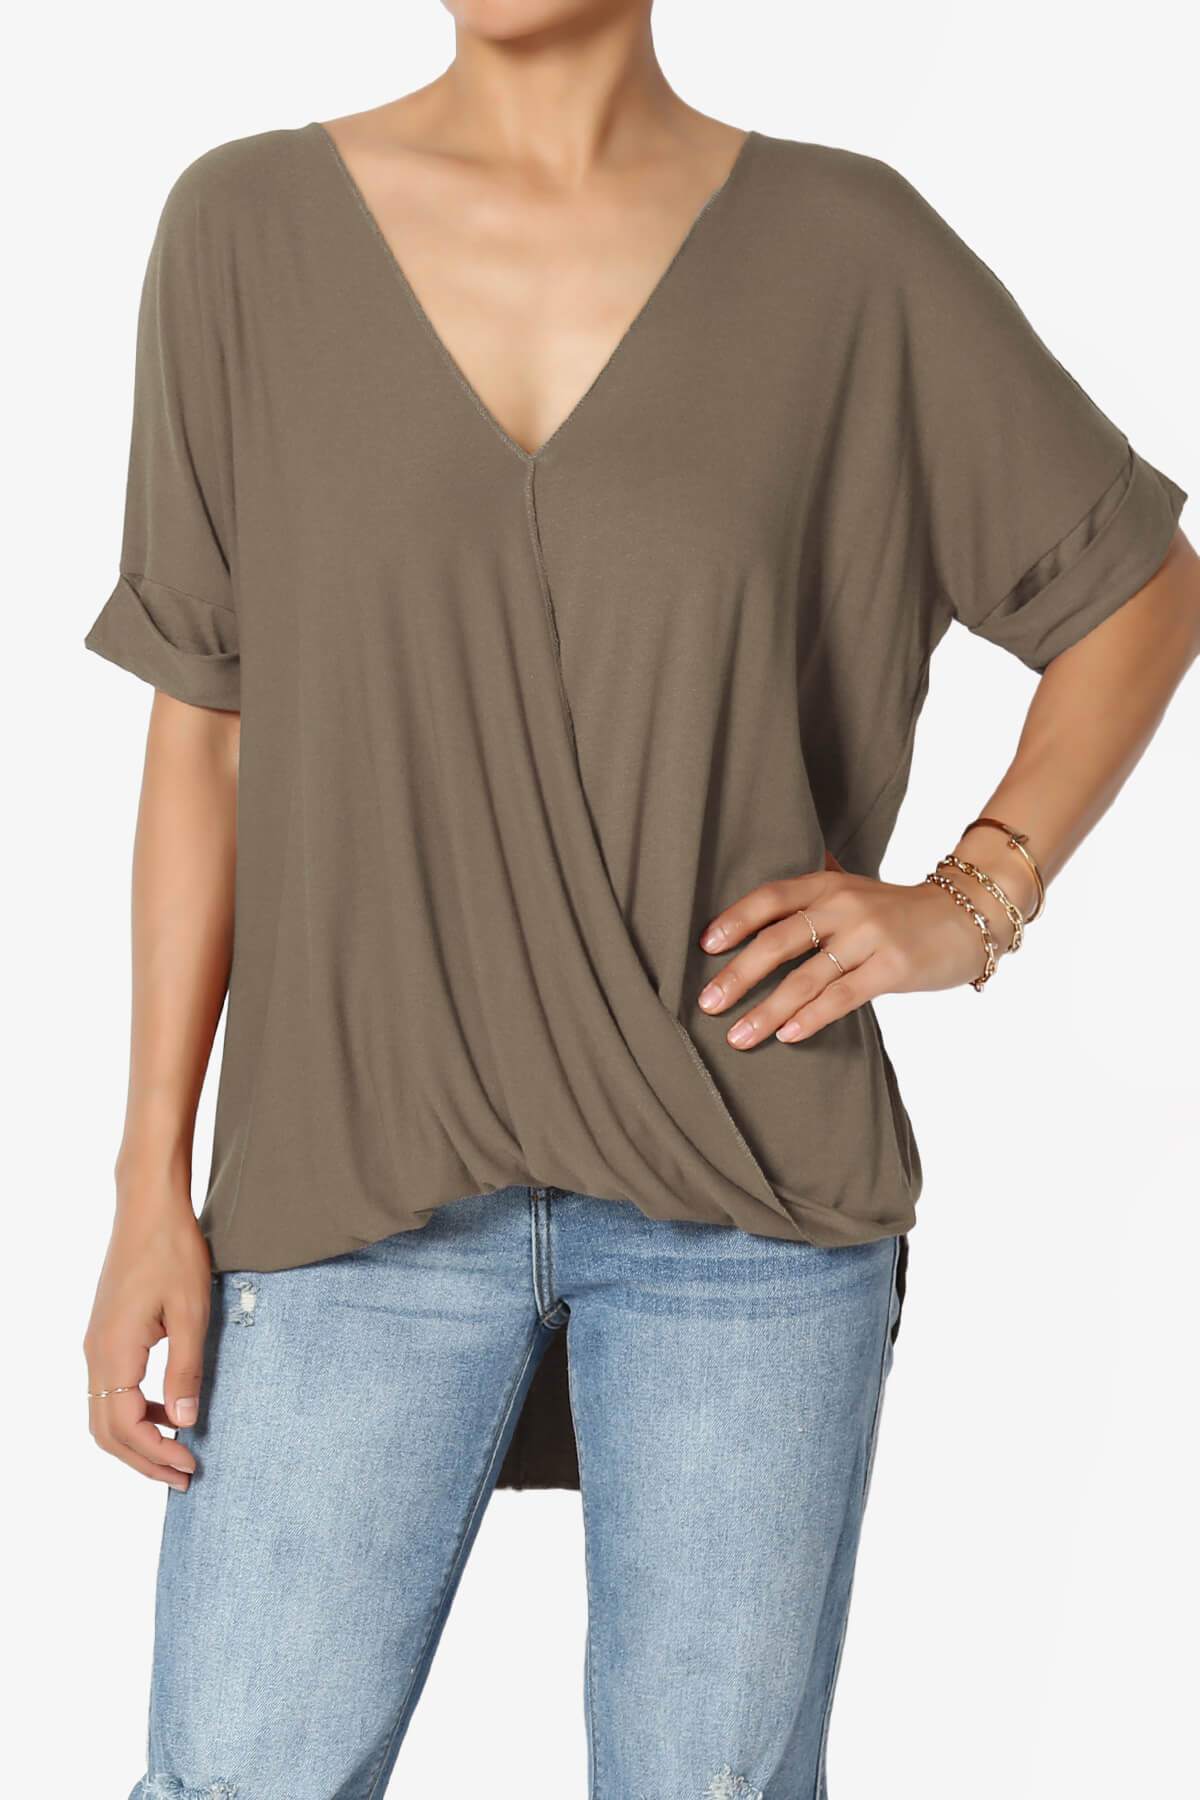 Load image into Gallery viewer, Tackle Wrap Hi-Low Crepe Knit Top MOCHA_1
